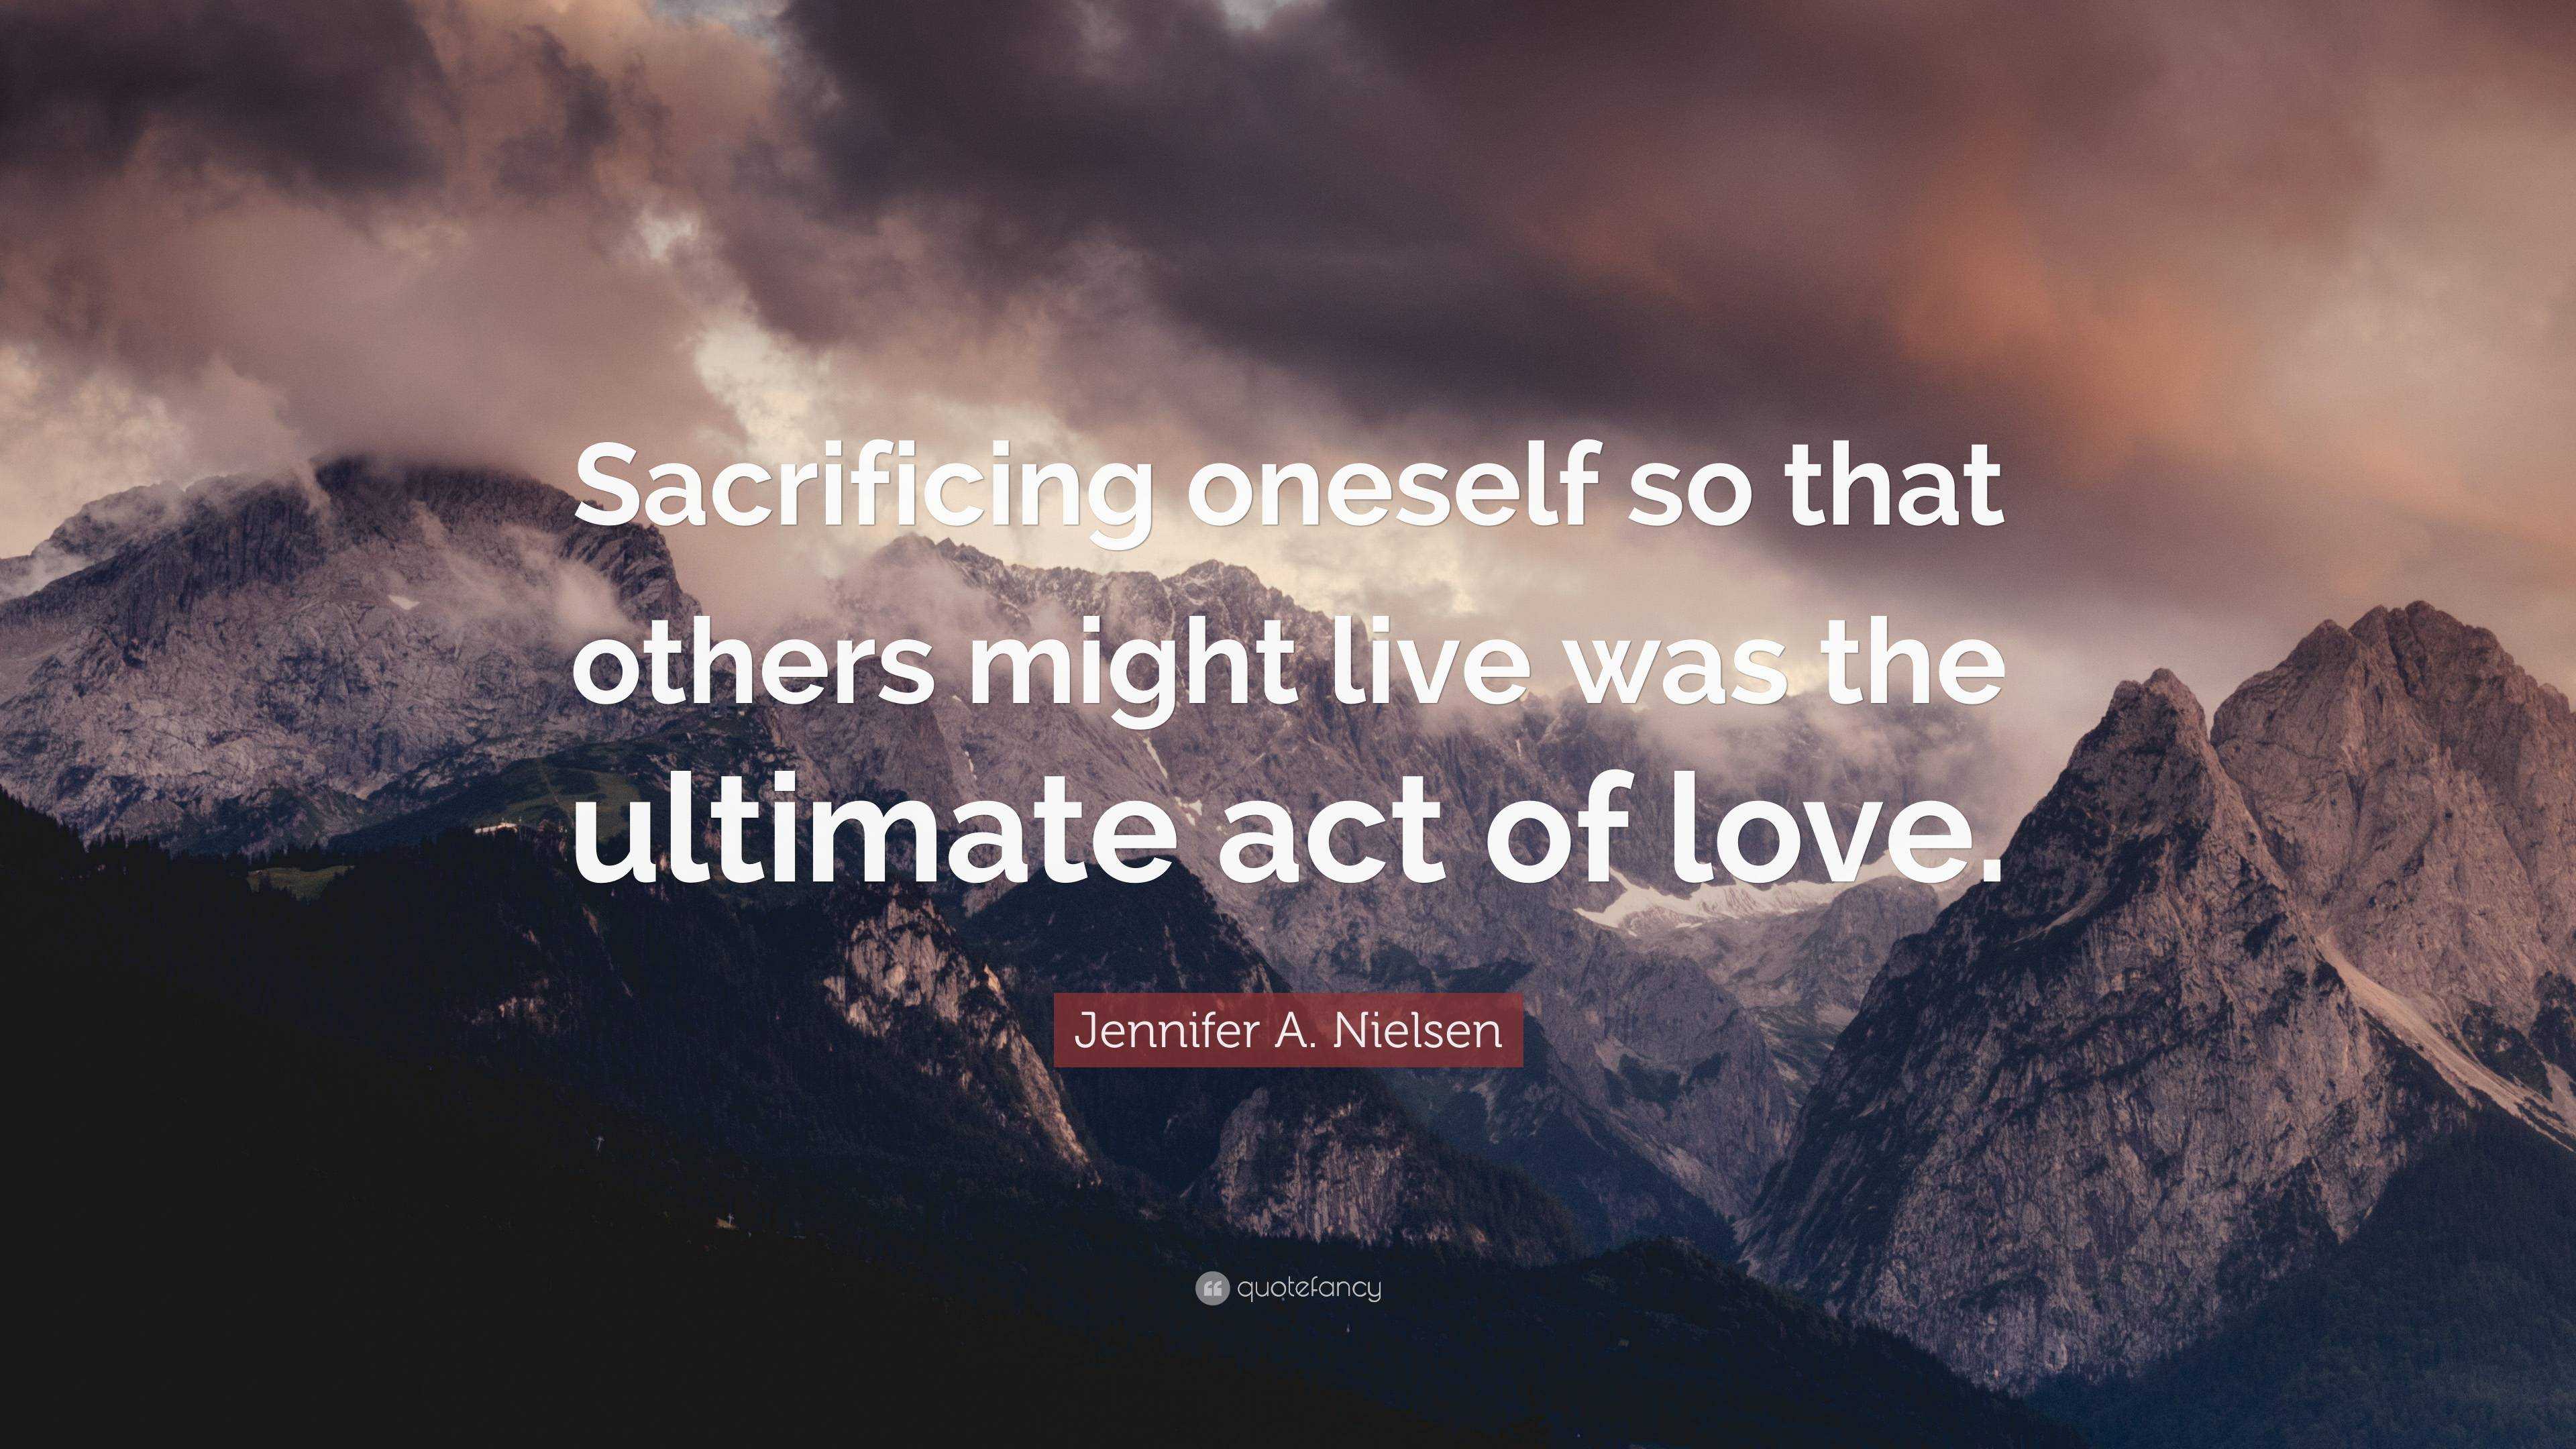 Jennifer A. Nielsen Quote: “Sacrificing oneself so that others might ...